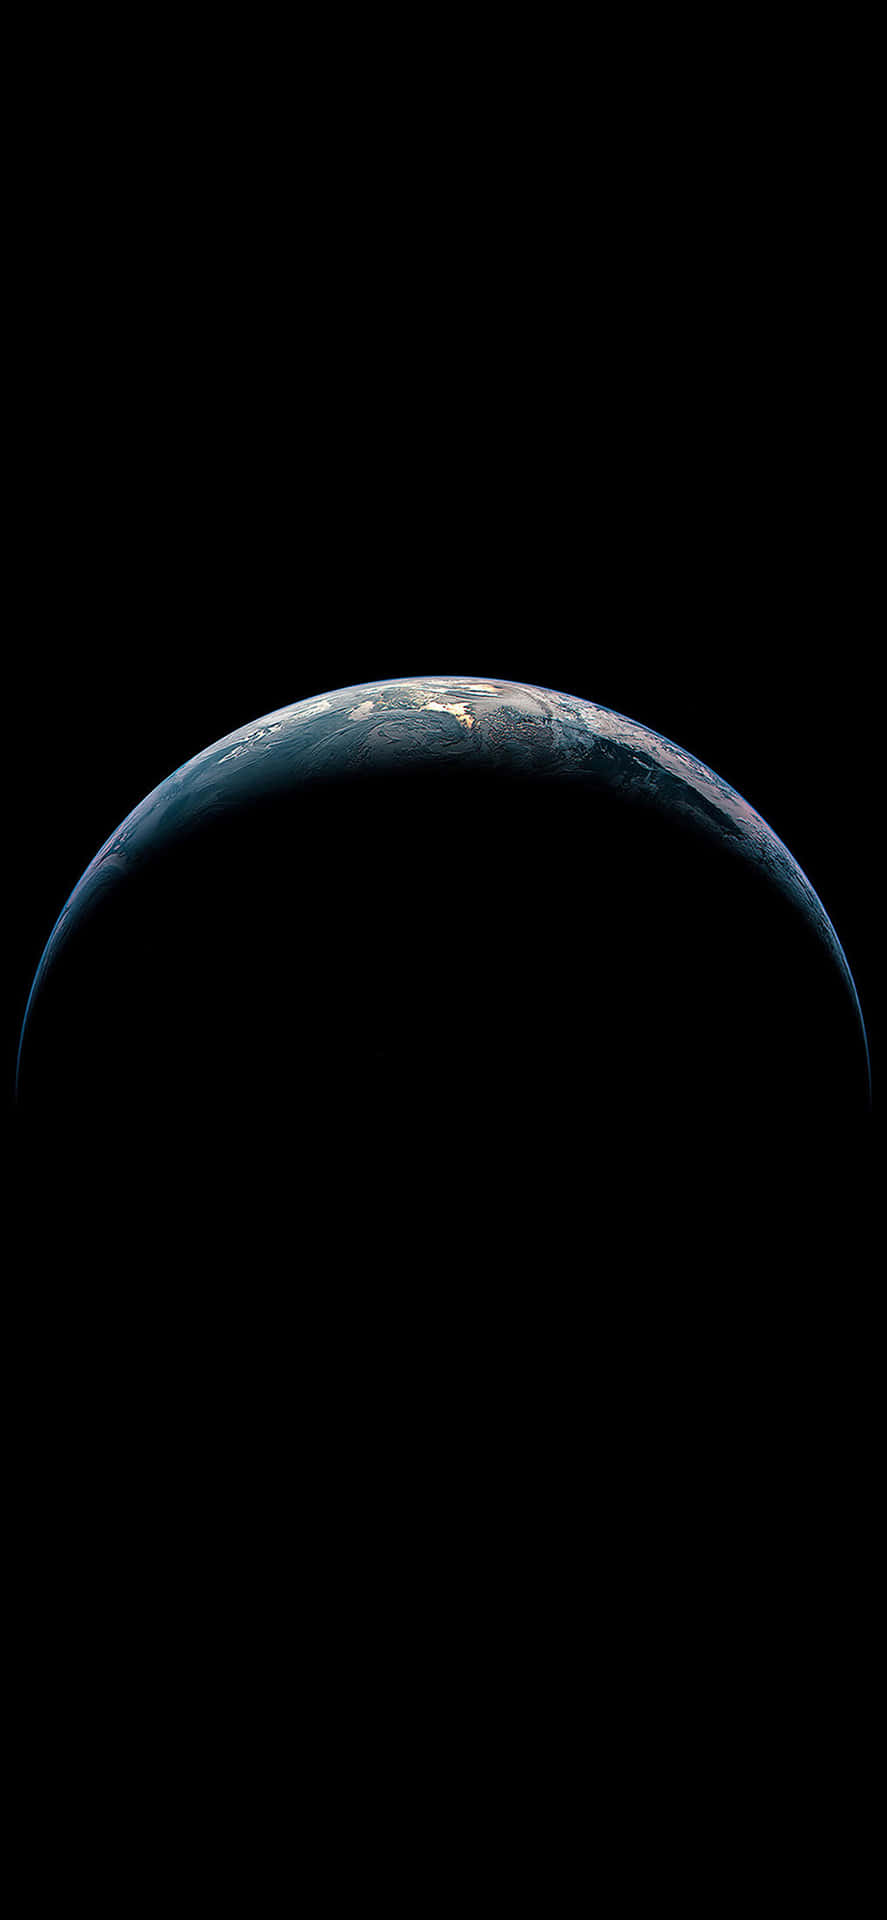 Iphone Xs Max Apple Background Earth Background